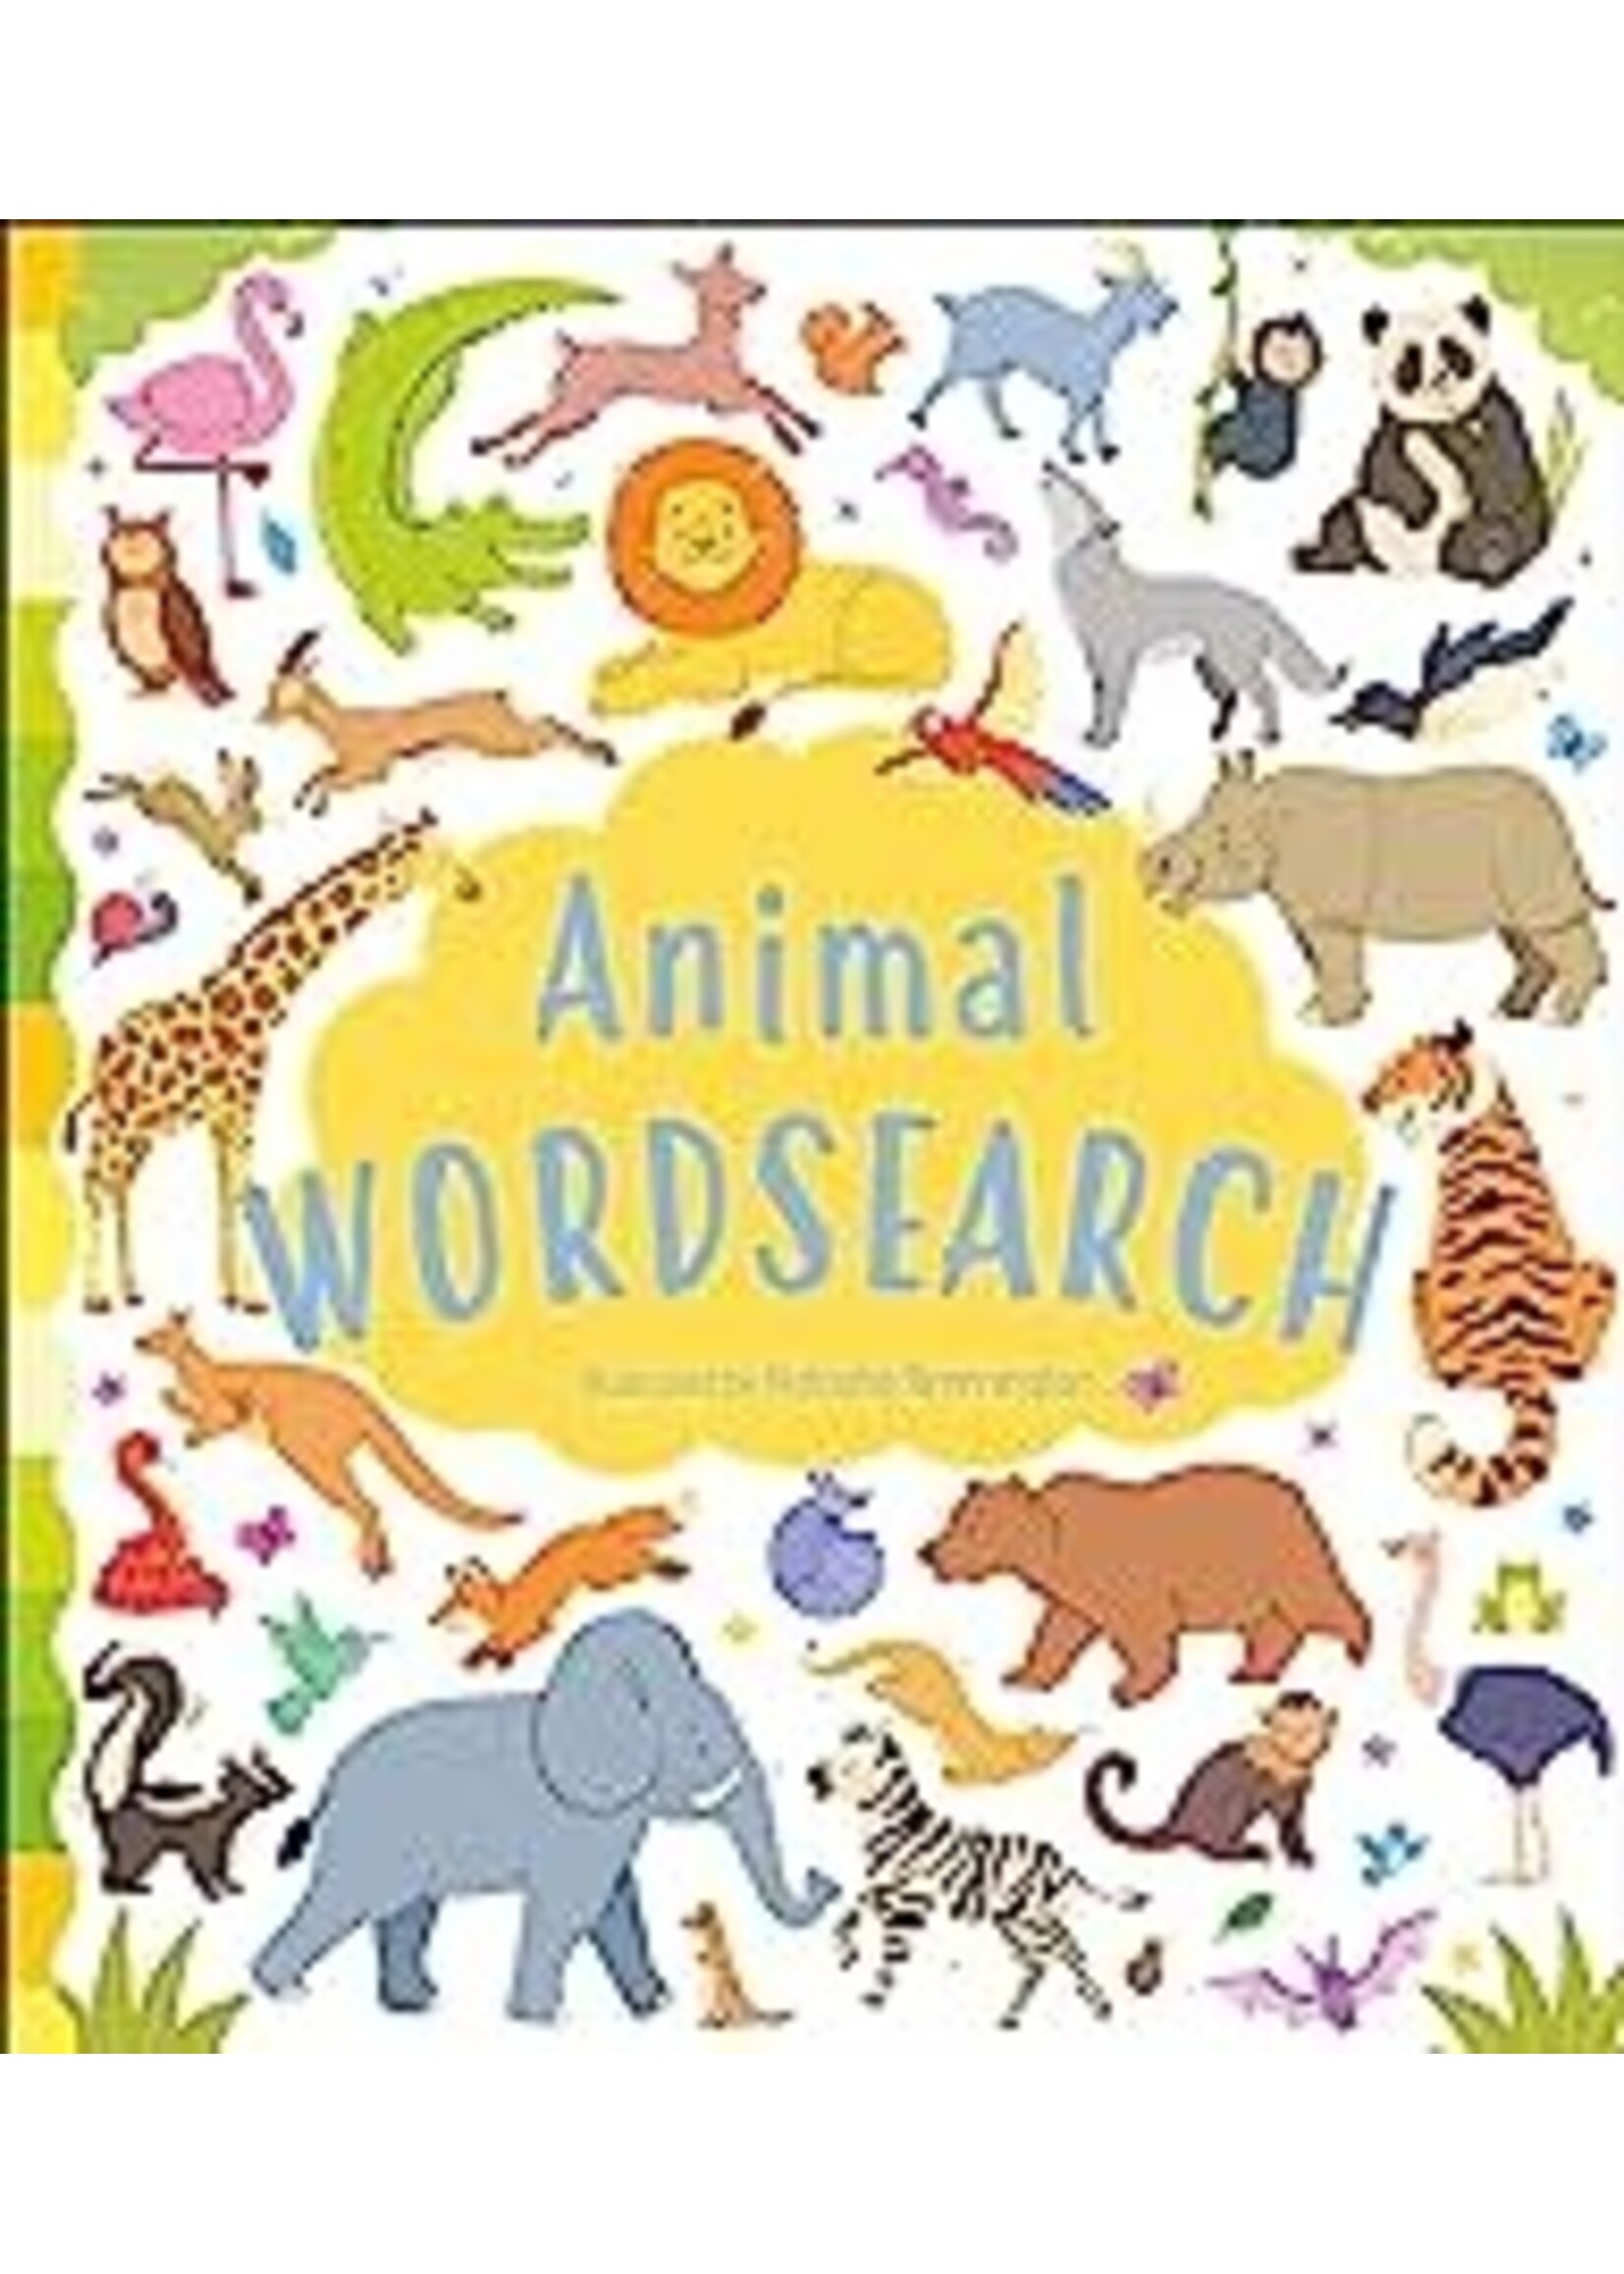 ANIMAL WORDSEARCH